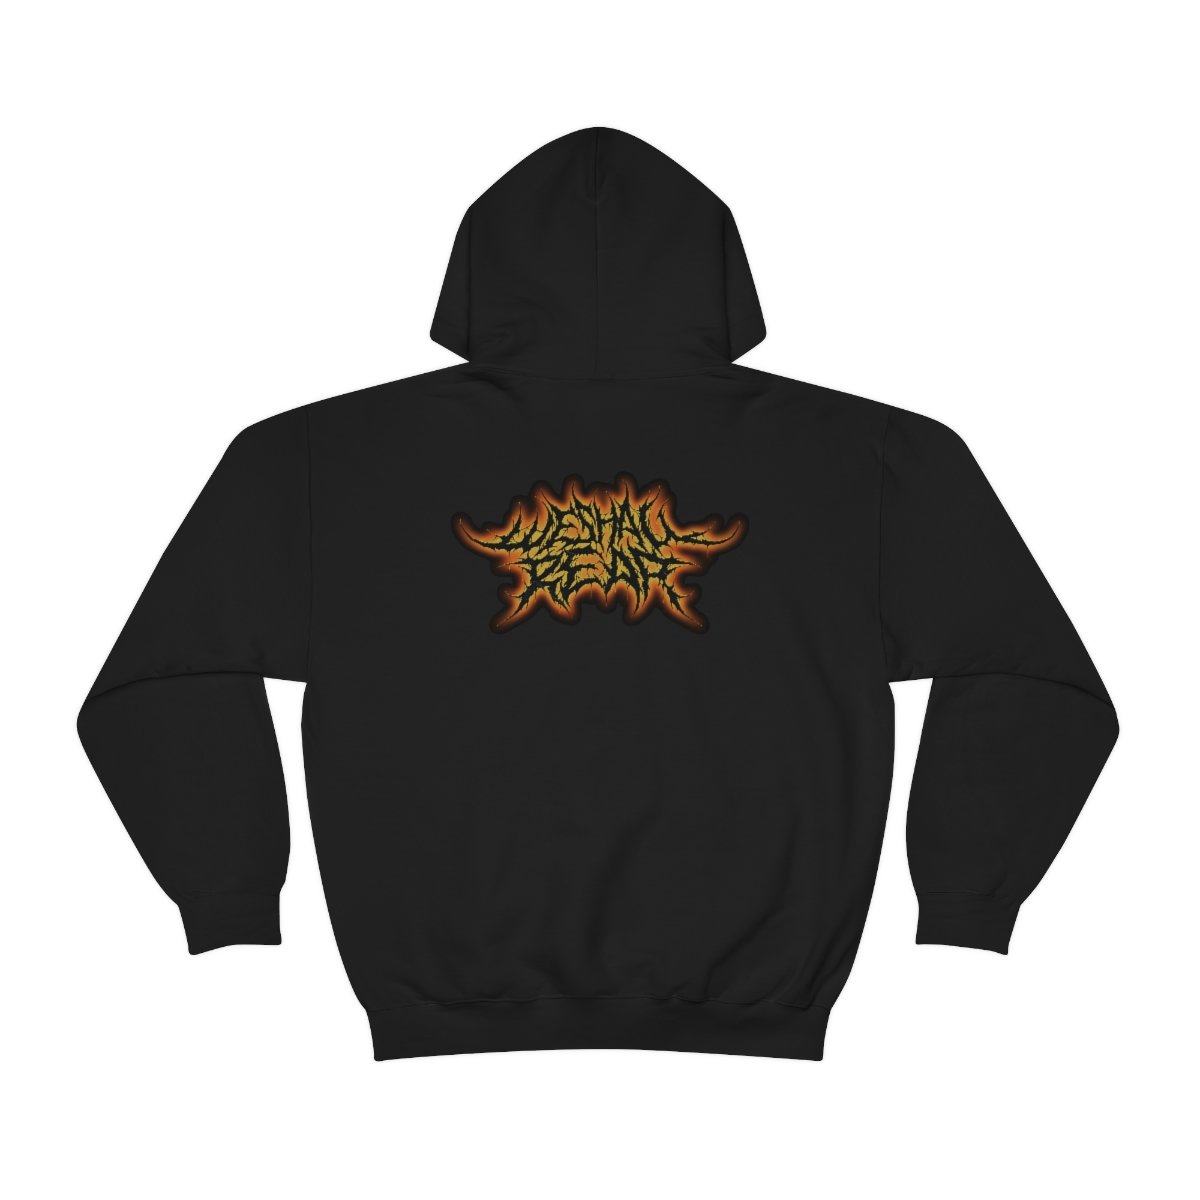 We Shall Reap Pullover Hooded Sweatshirt